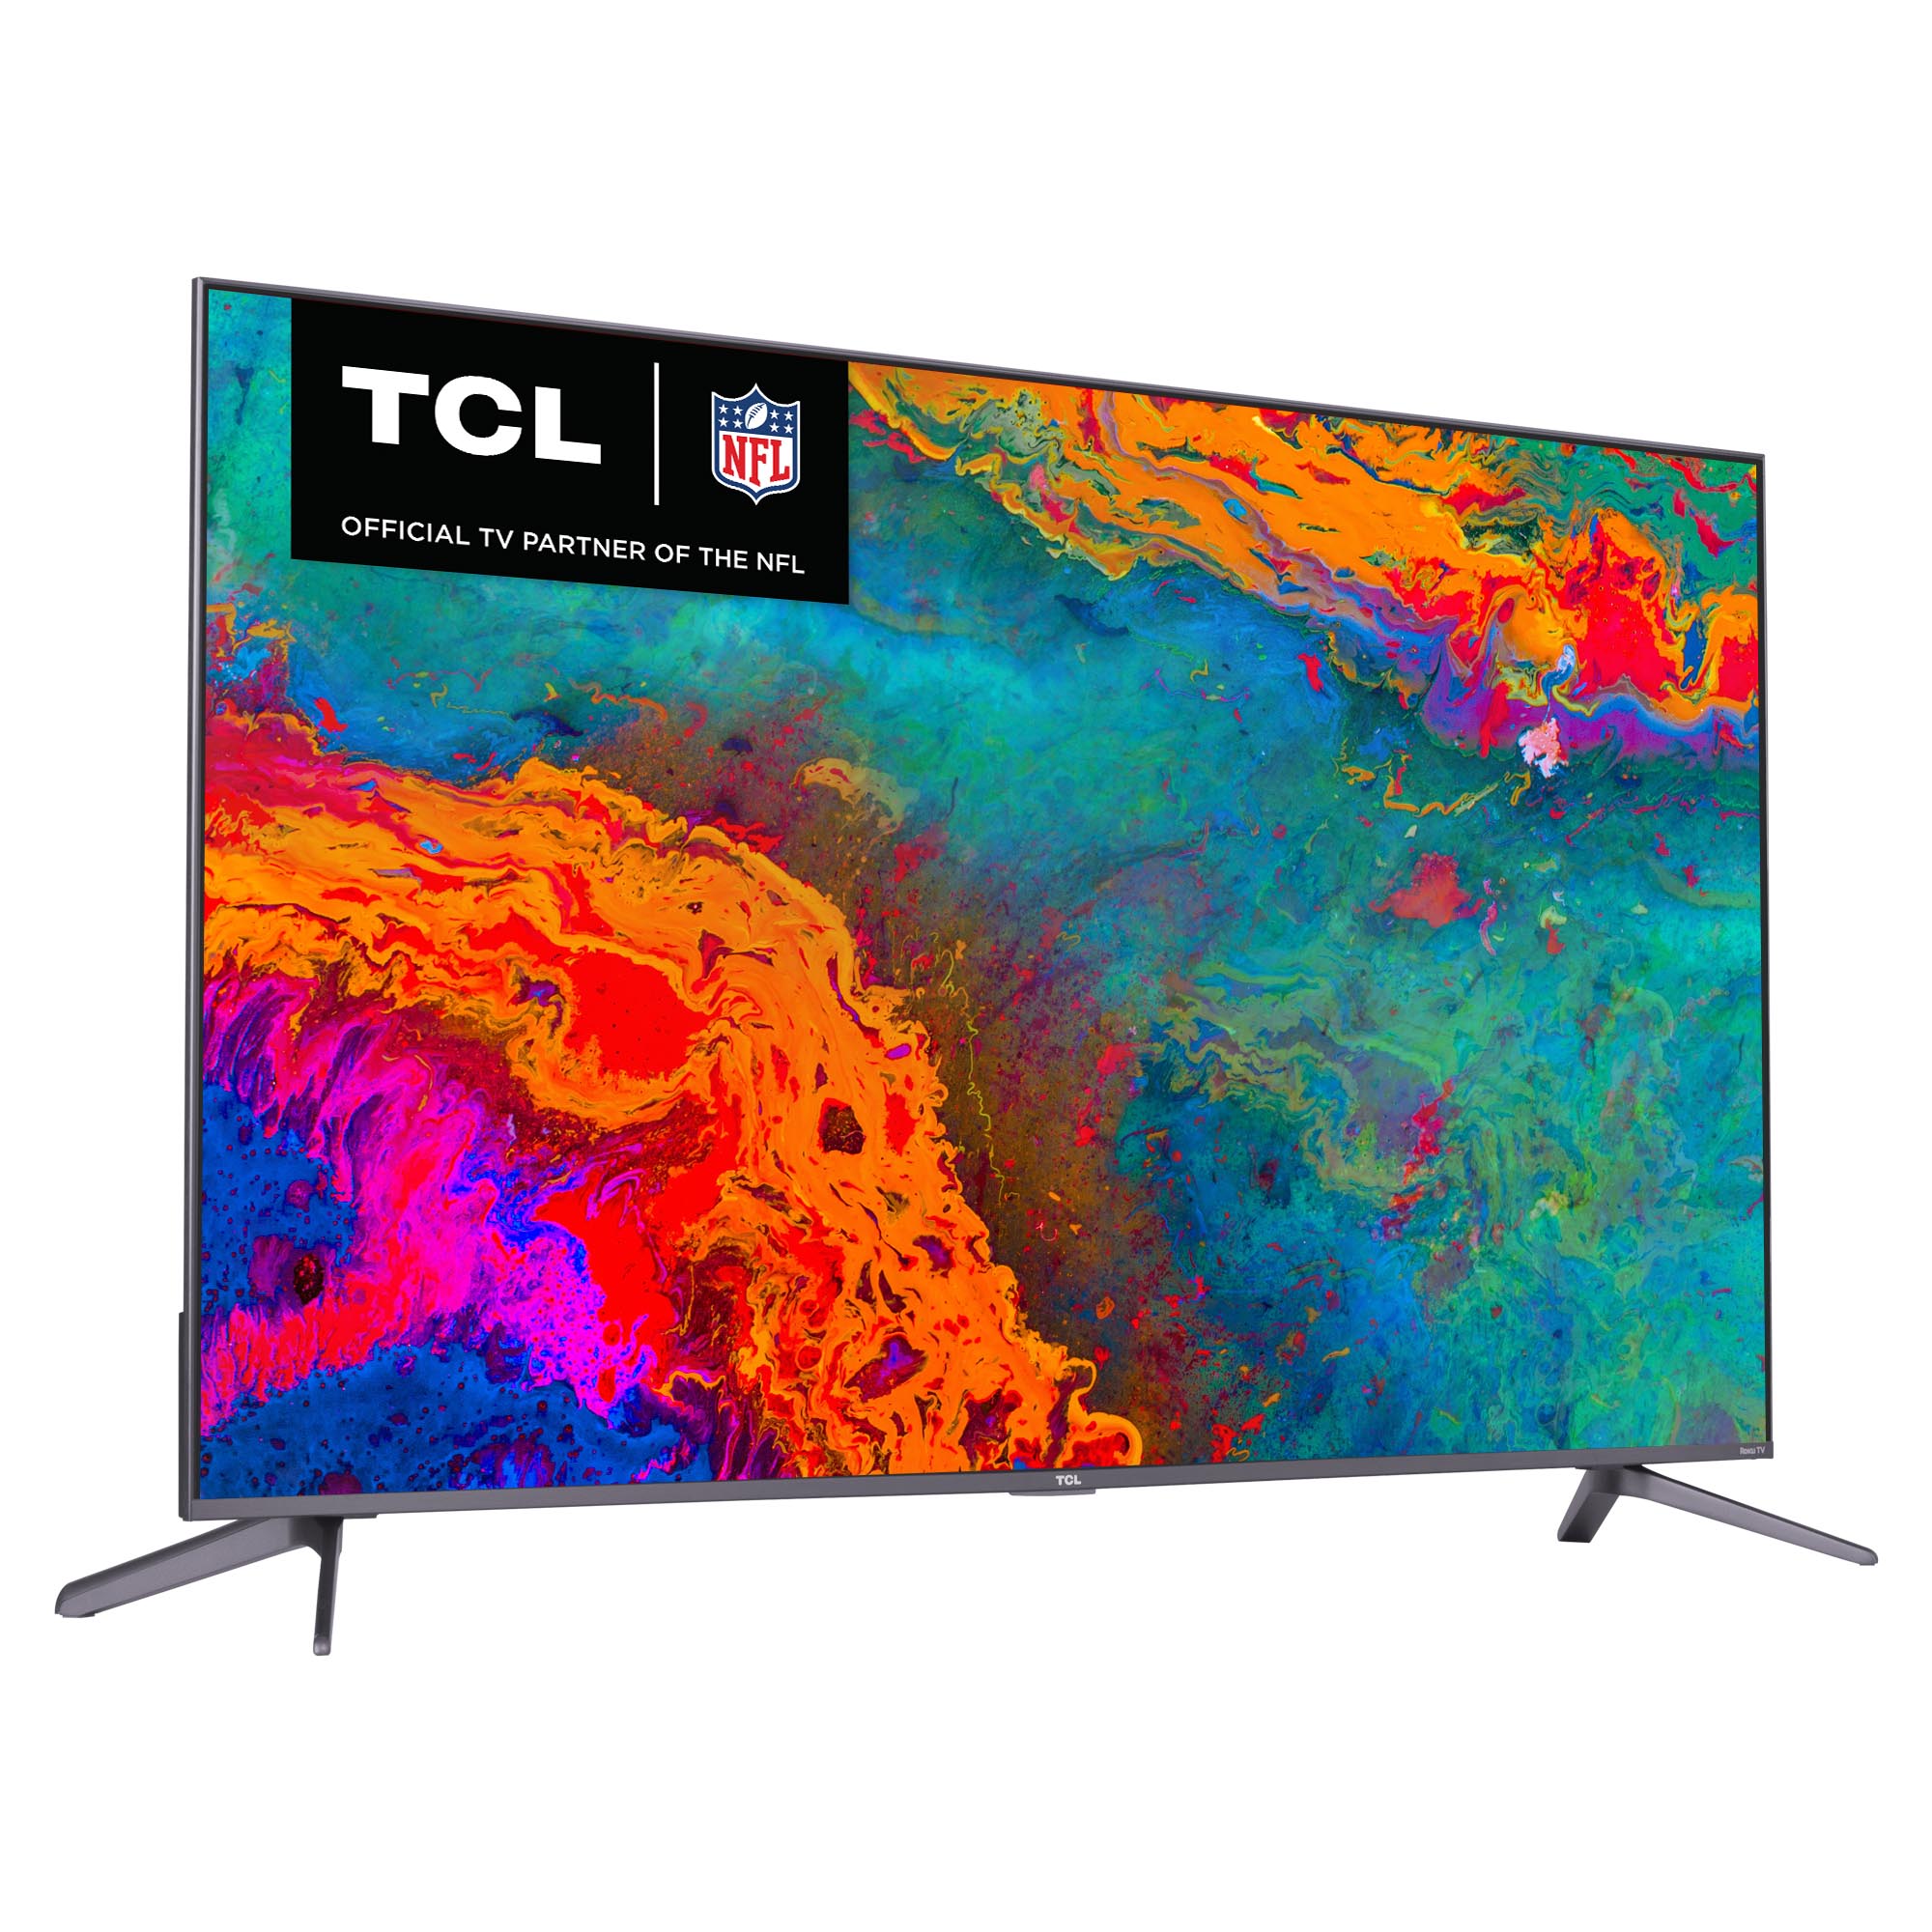 TCL 50" Class 5-Series 4K UHD Dolby Vision HDR QLED Roku Smart TV - 50S535 - image 4 of 11